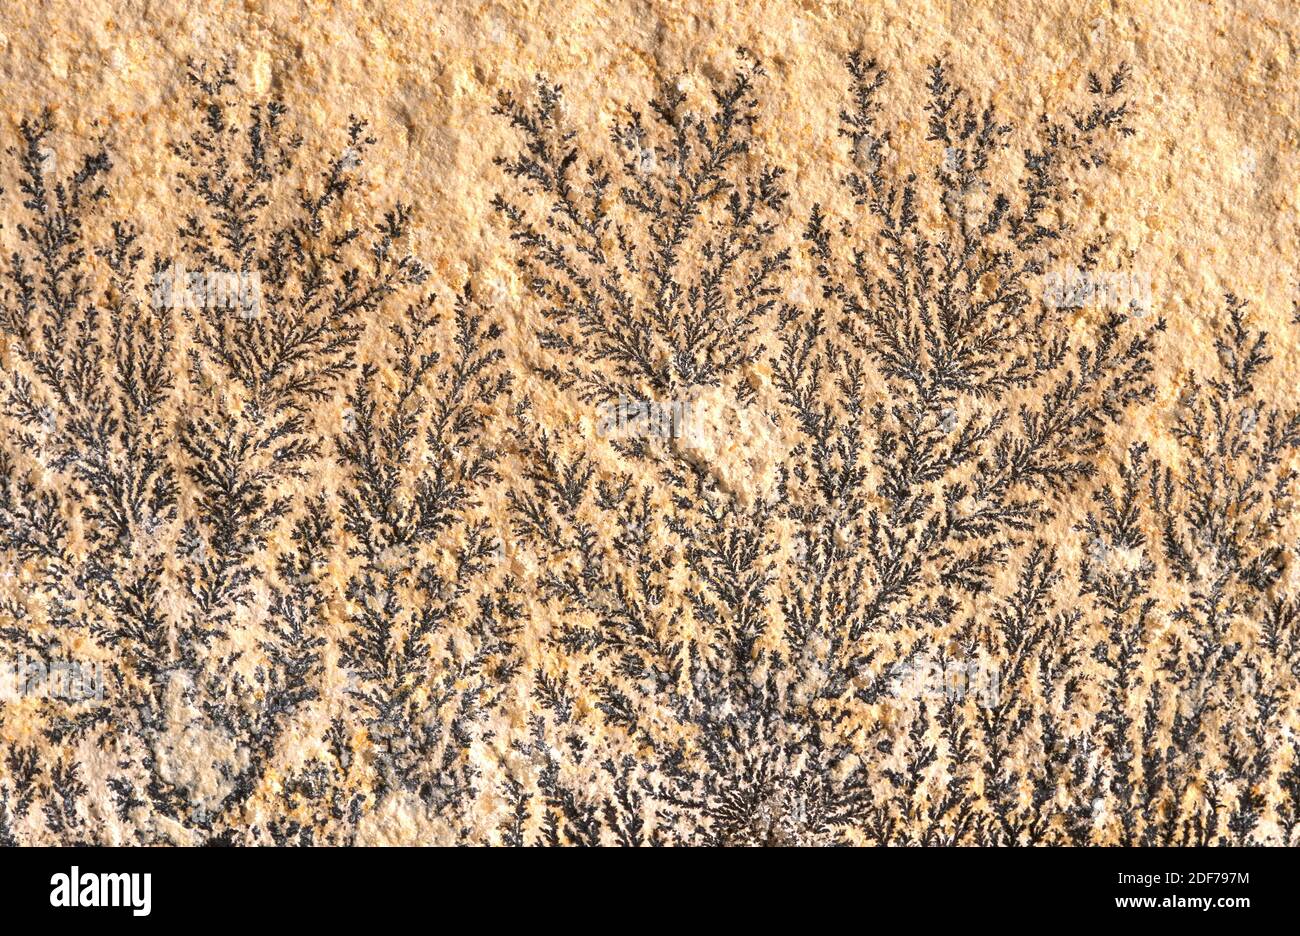 Dendritic pyrolusite on a limestone plate. Pyrolusite is a manganese oxide mineral. Stock Photo